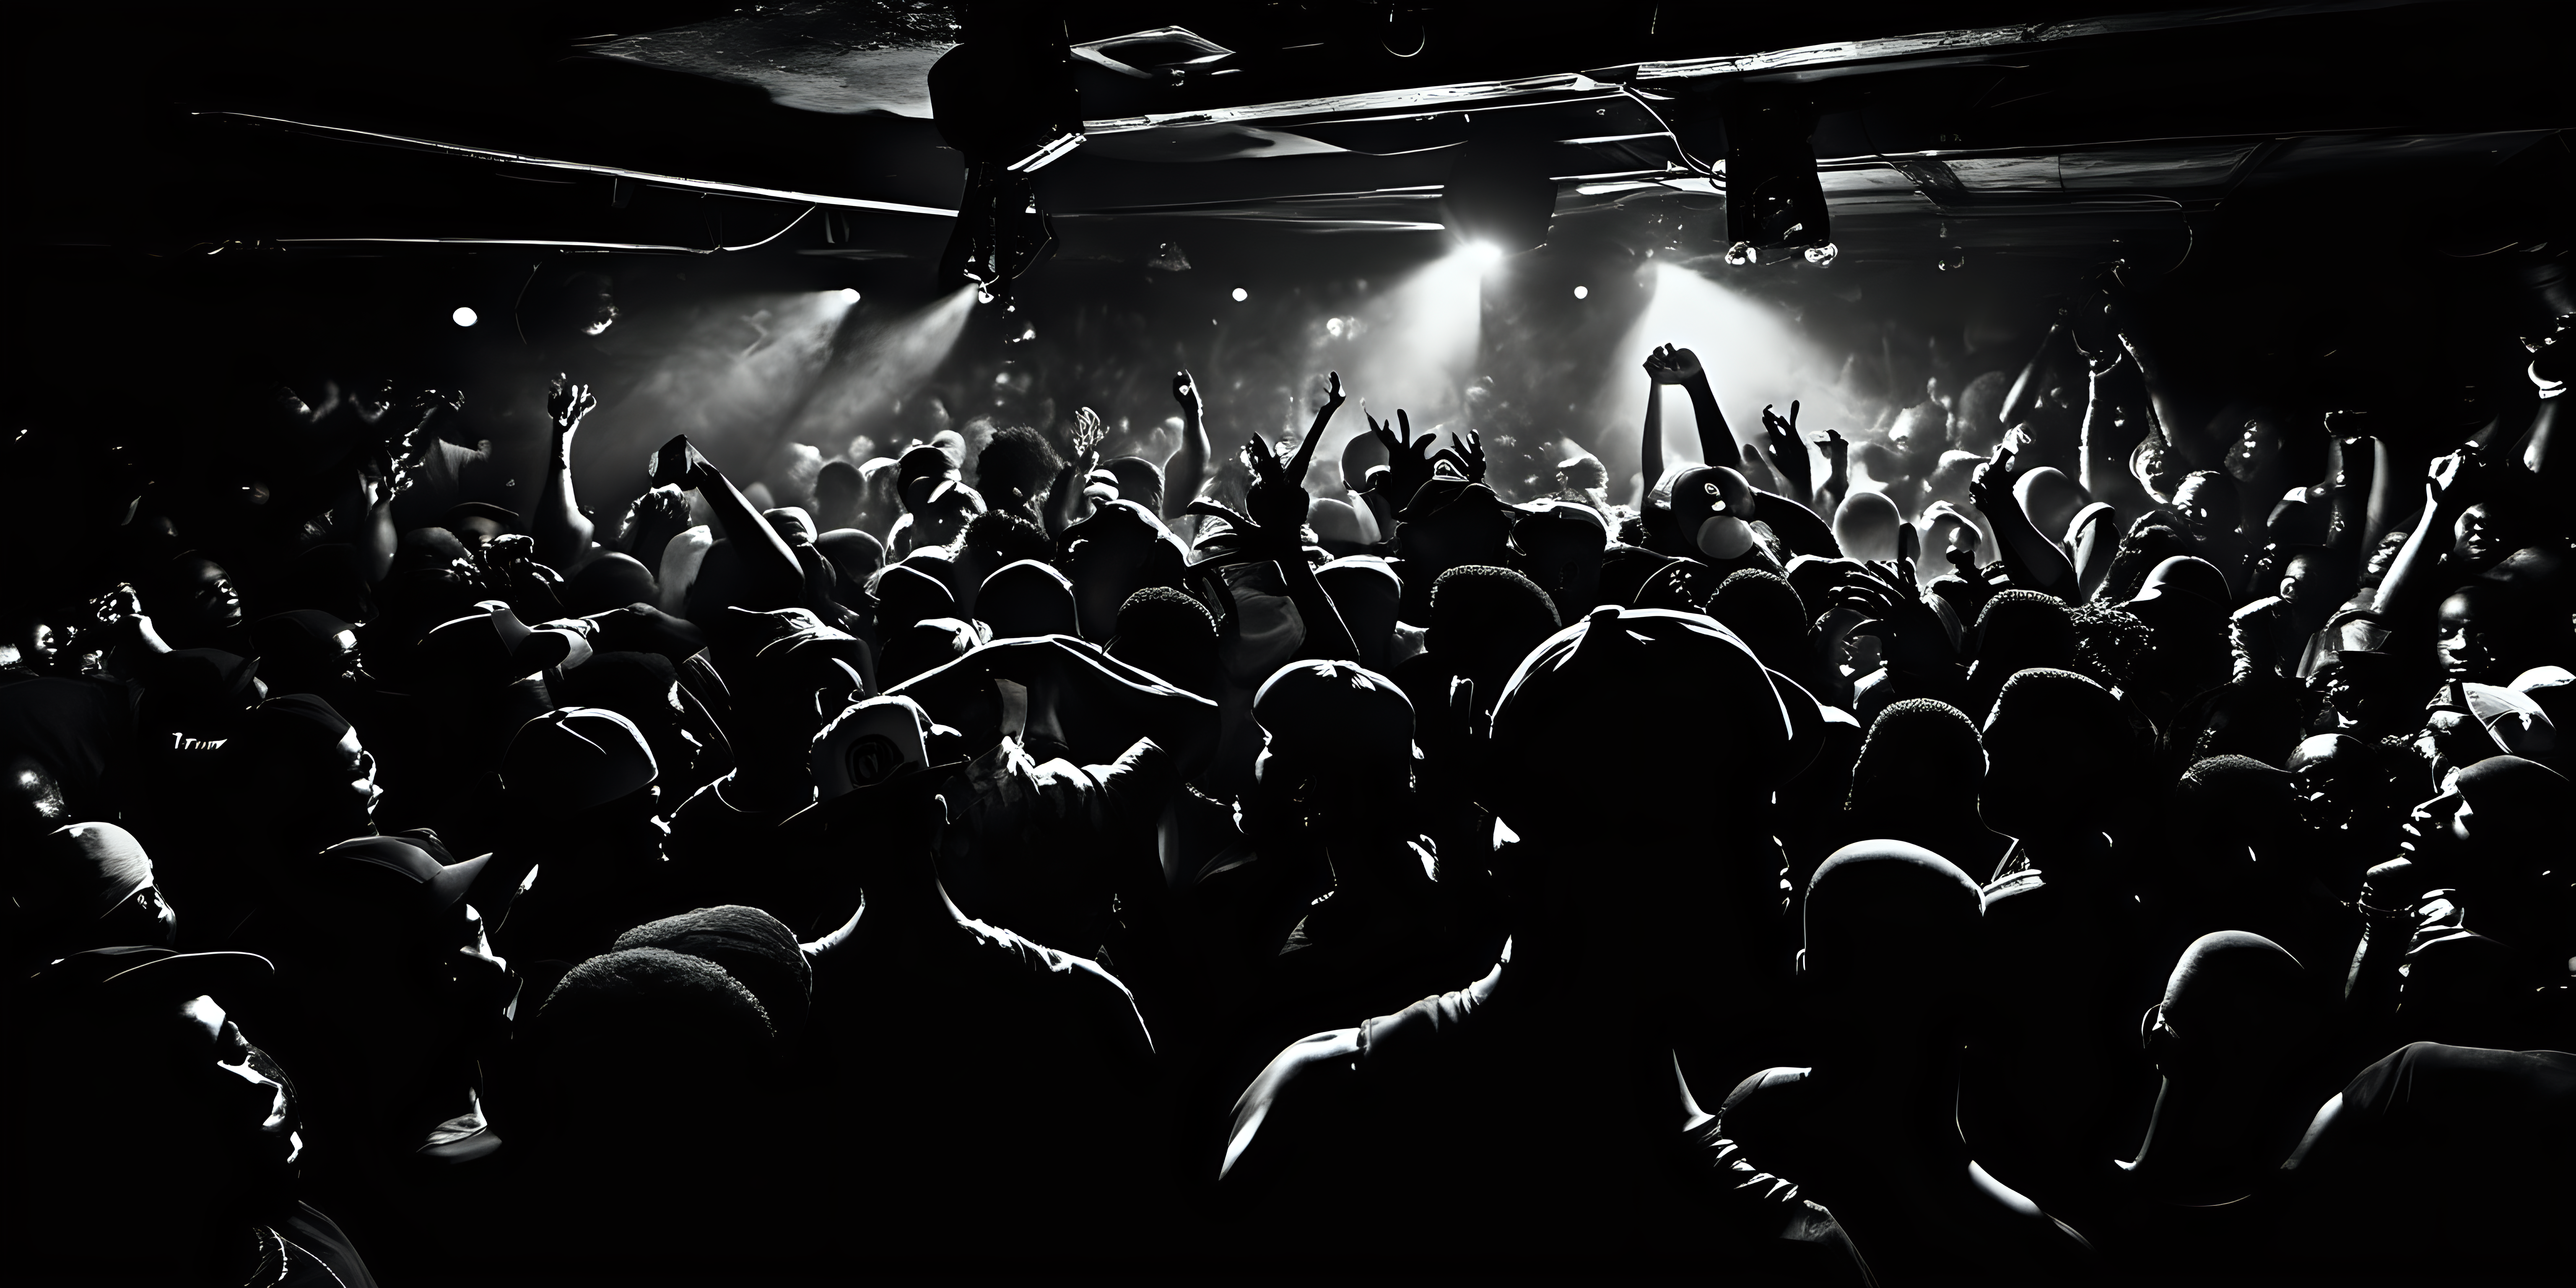 photograph of a crowded hiphop club scene Dark